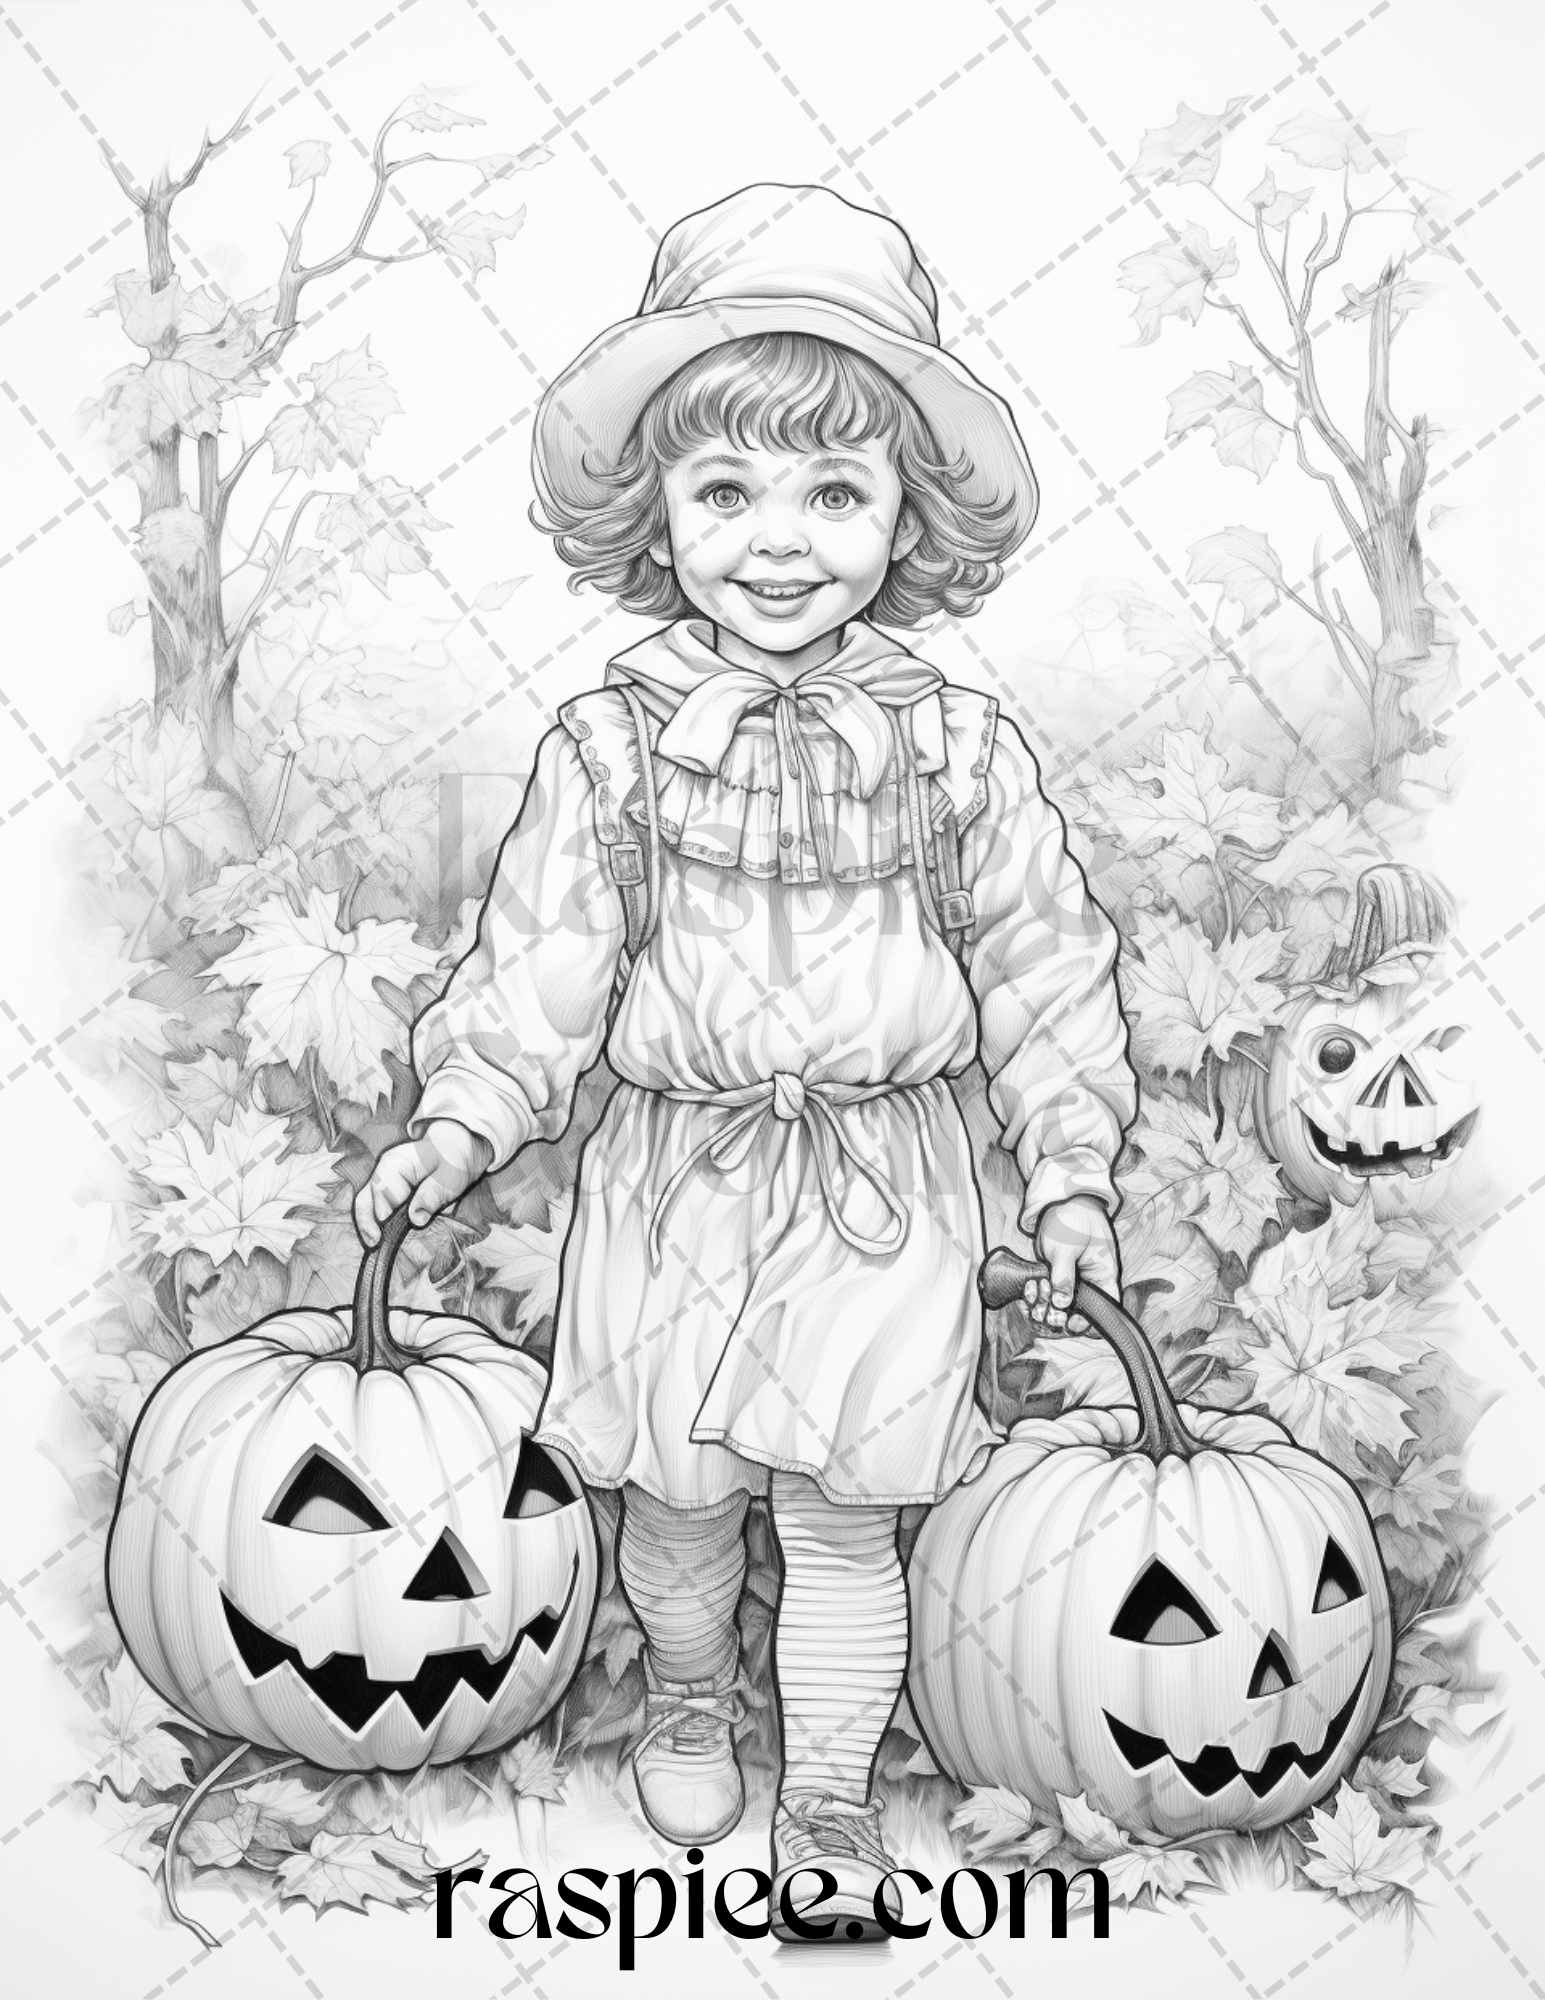 Vintage Halloween Coloring Pages, Grayscale Trick or Treat Designs, Adult Printable Coloring Sheets, Retro Halloween Decorations, DIY Coloring Book Pages, Autumn Coloring Pages, Vintage Halloween DIY Craft, Halloween Grayscale Coloring Pages, October Coloring Pages